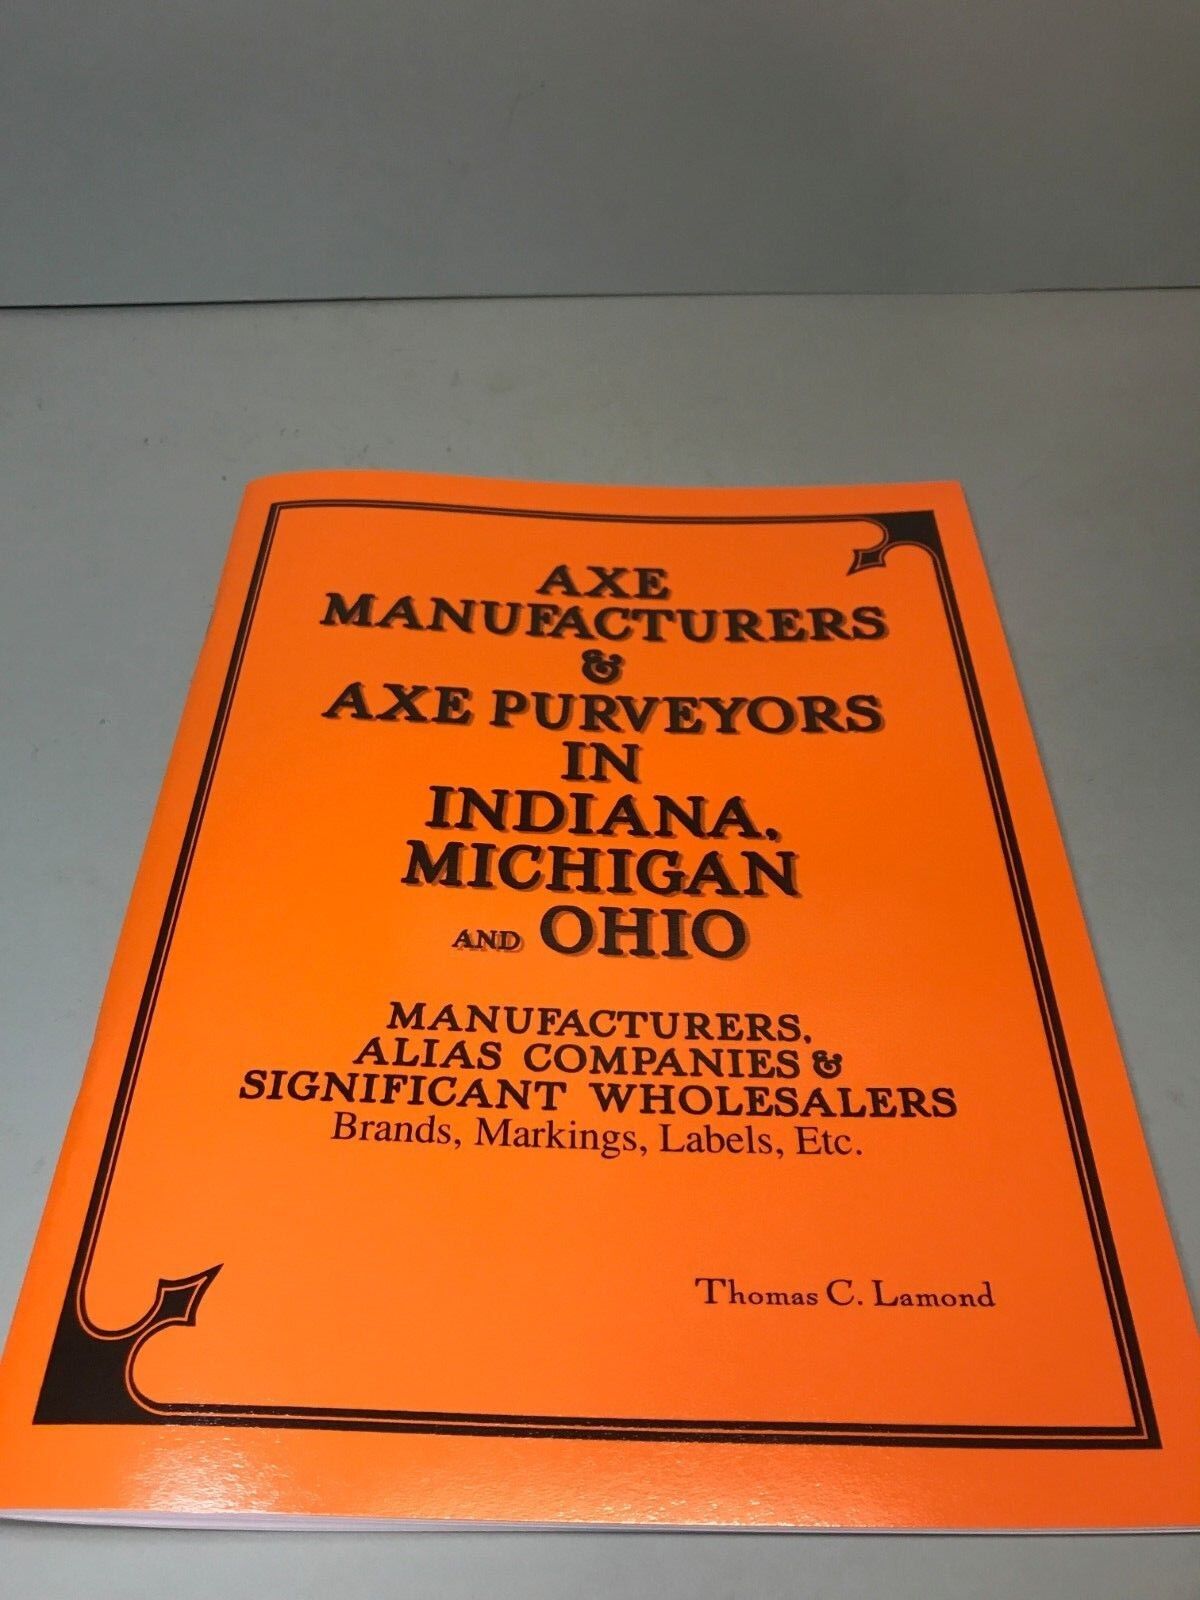 AXE MANUFACTURERS & PURVEYORS IN INDIANA, MICHIGAN, AND OHIO  BY THOMAS LAMOND